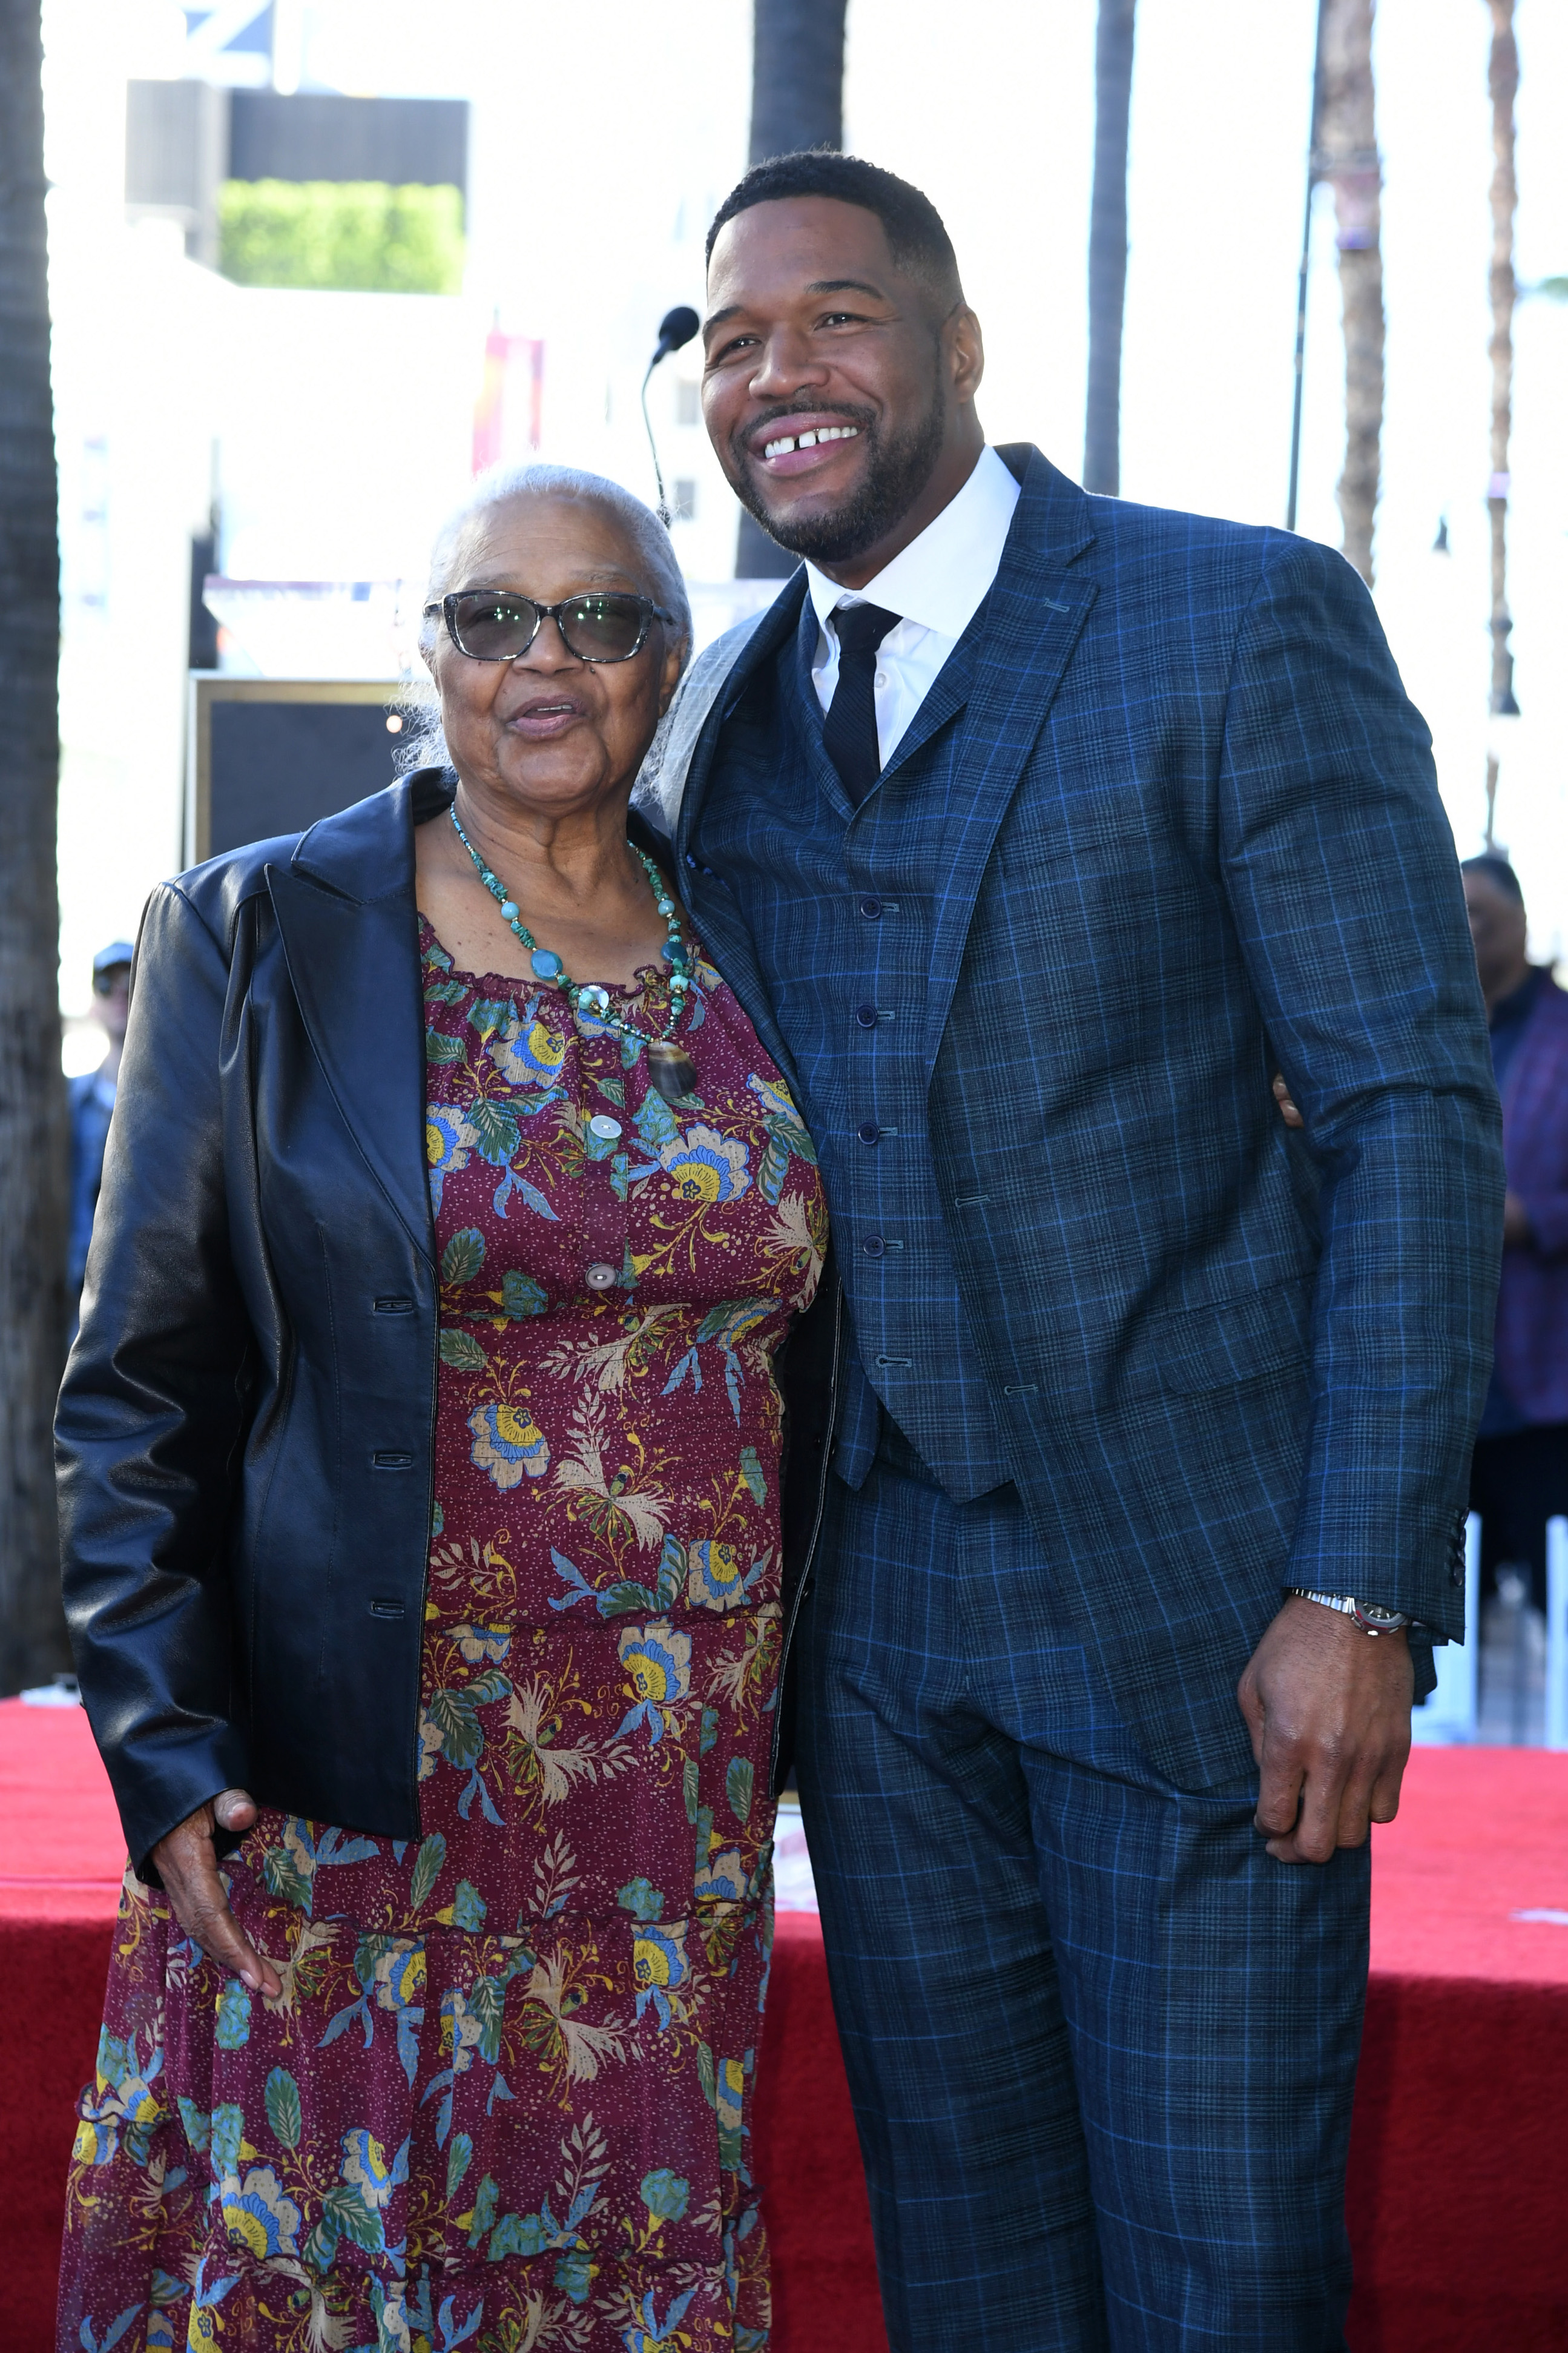 Louise and Michael Strahan at his Hollywood Walk of Fame star ceremony in Los Angeles, California on January 23, 2023 | Source: Getty Images